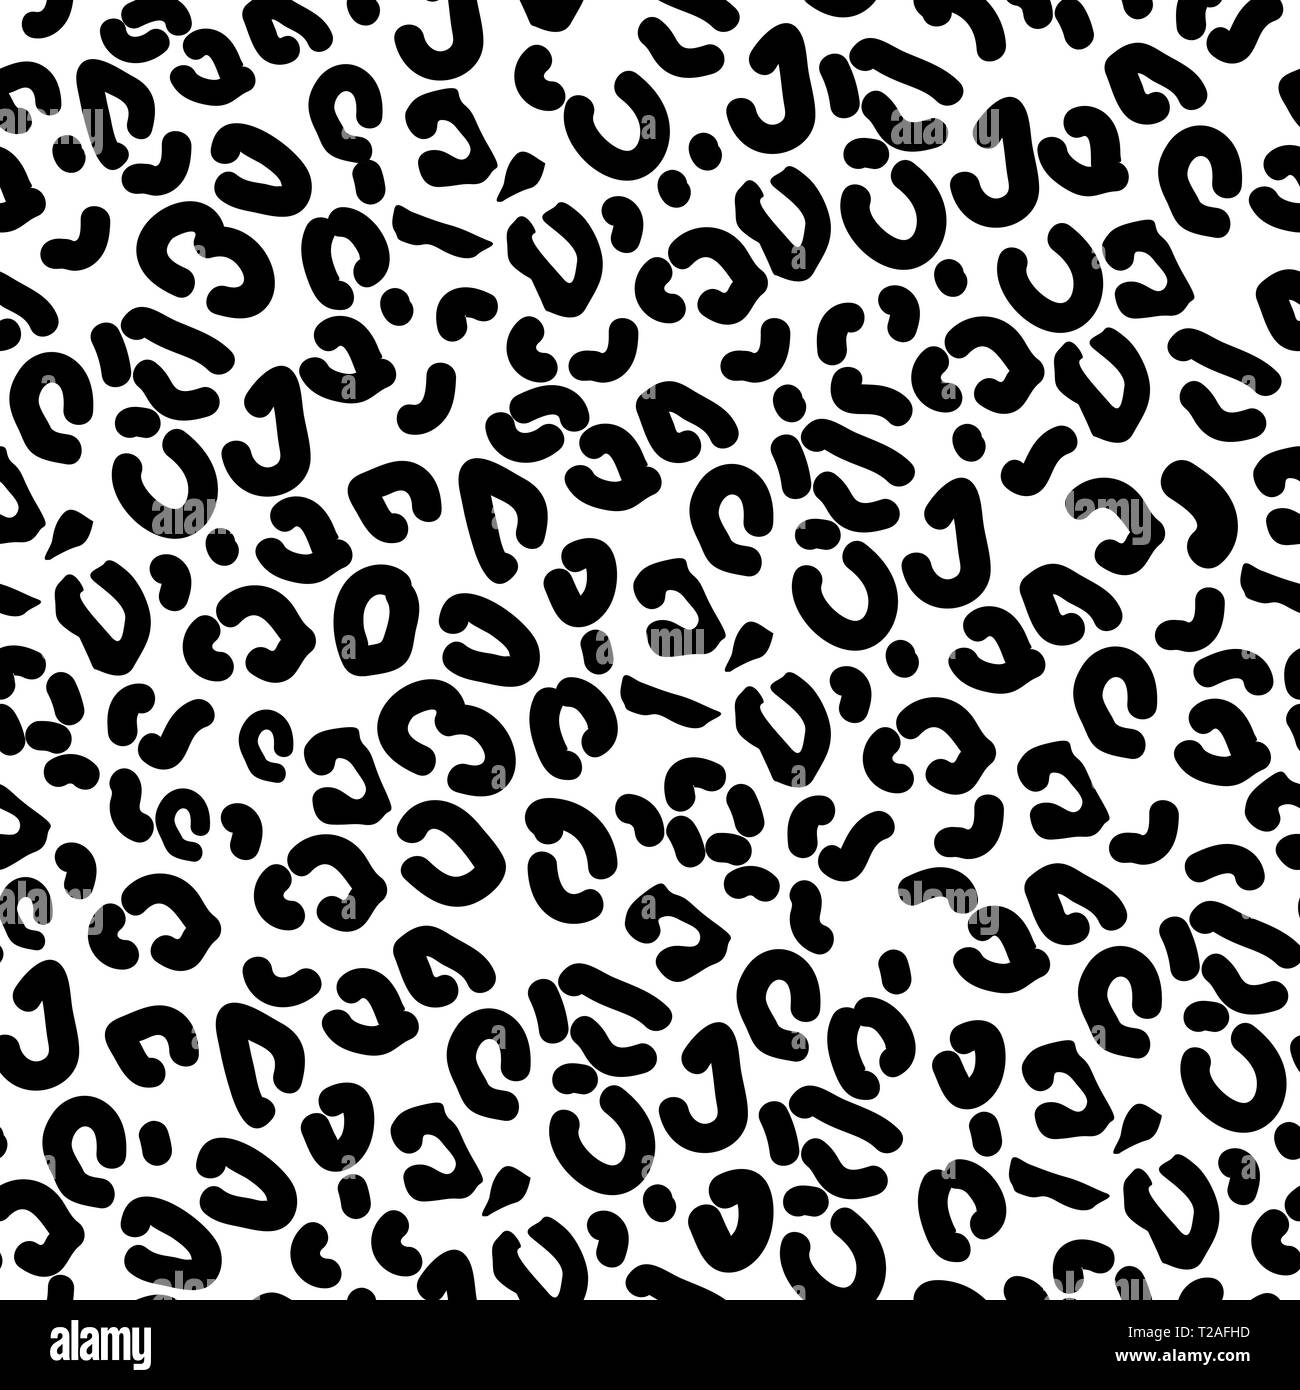 Leopard seamless pattern. Animal print. Vector background eps 10 Stock Vector